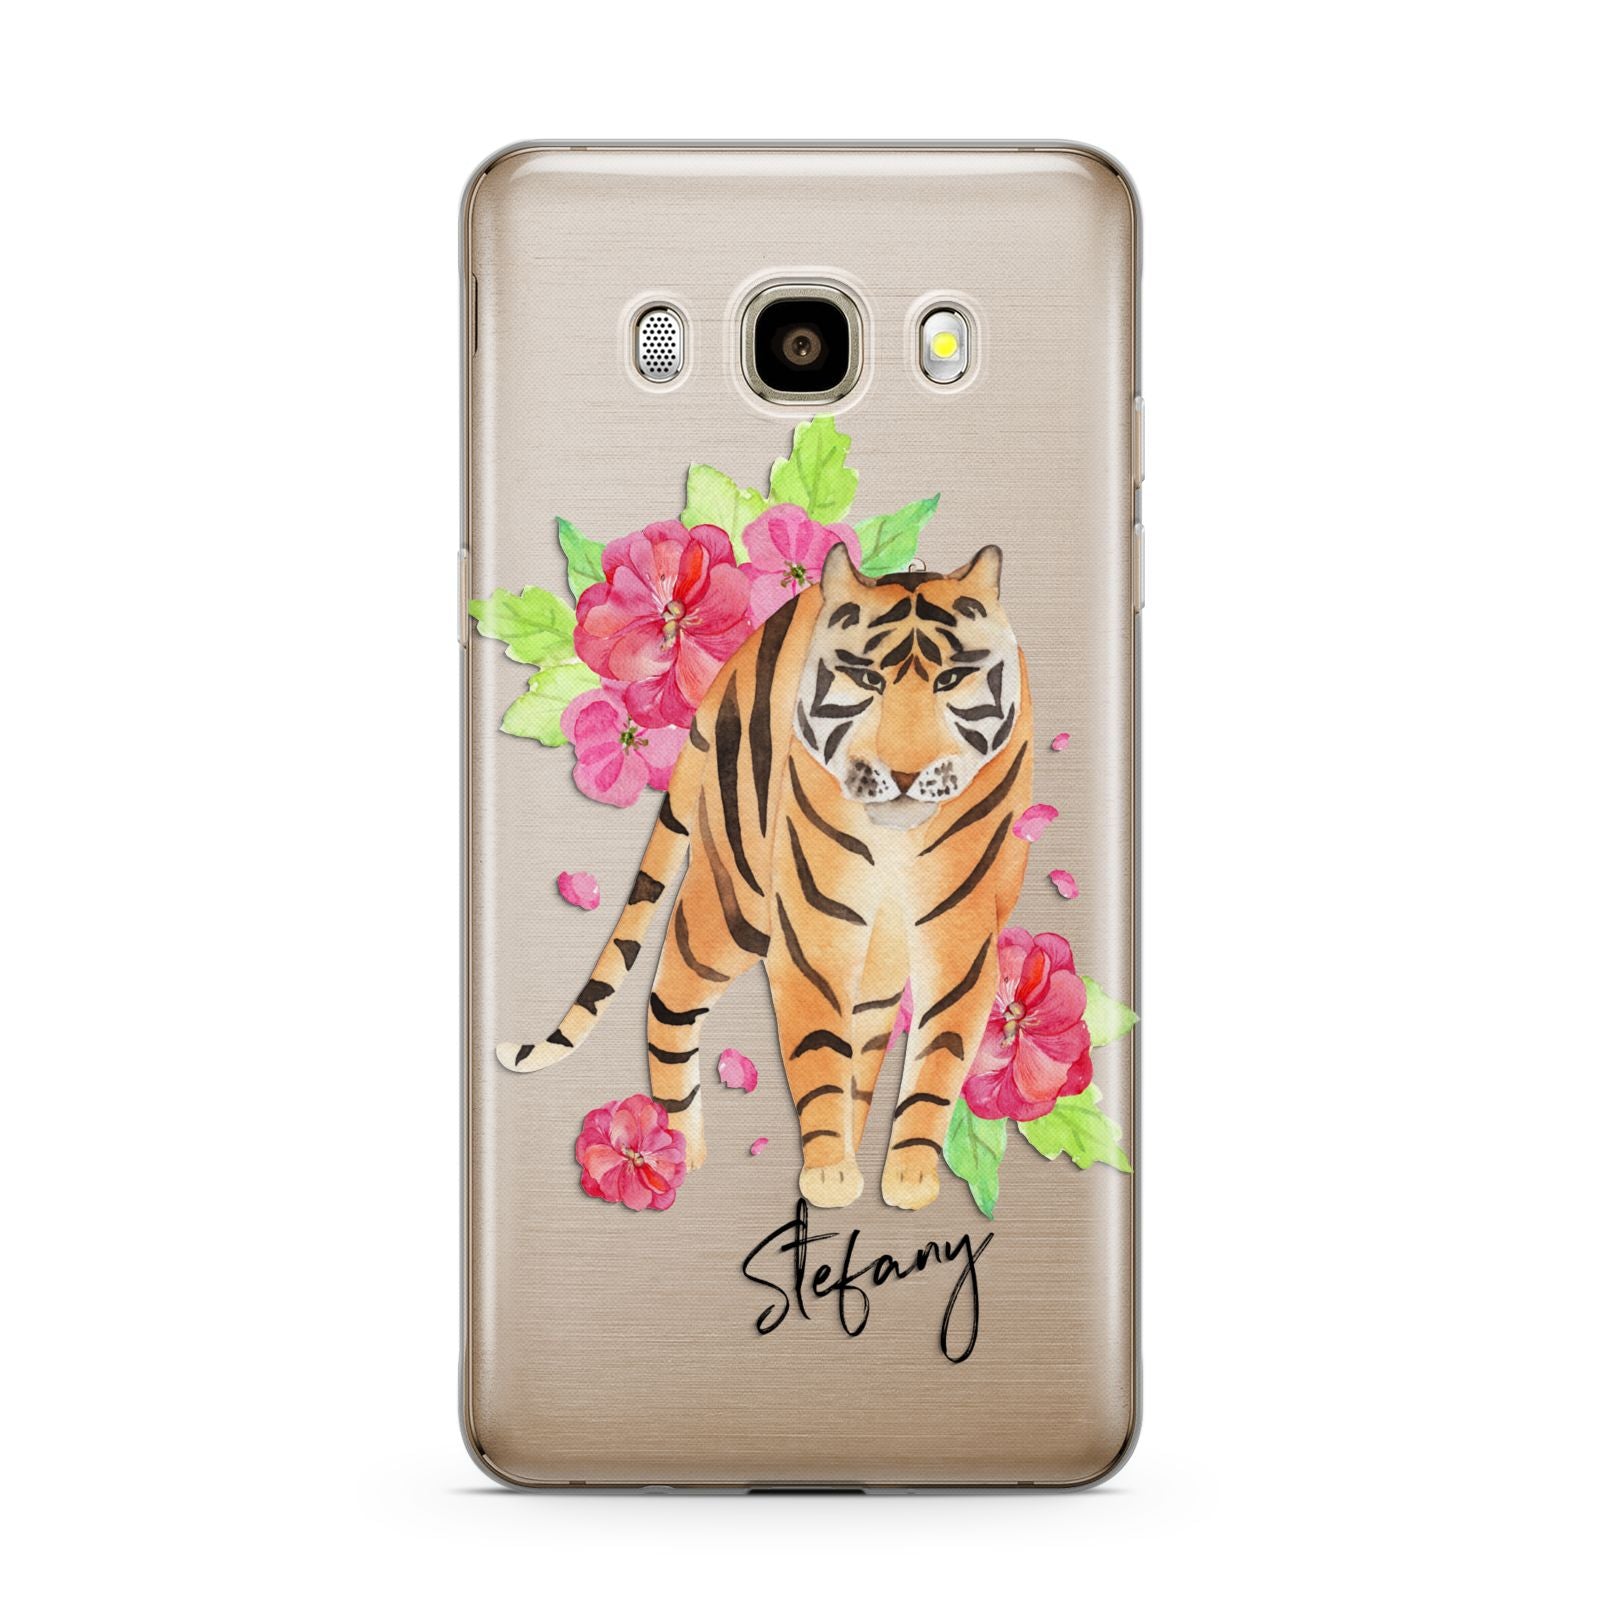 Personalised Tiger Samsung Galaxy J7 2016 Case on gold phone